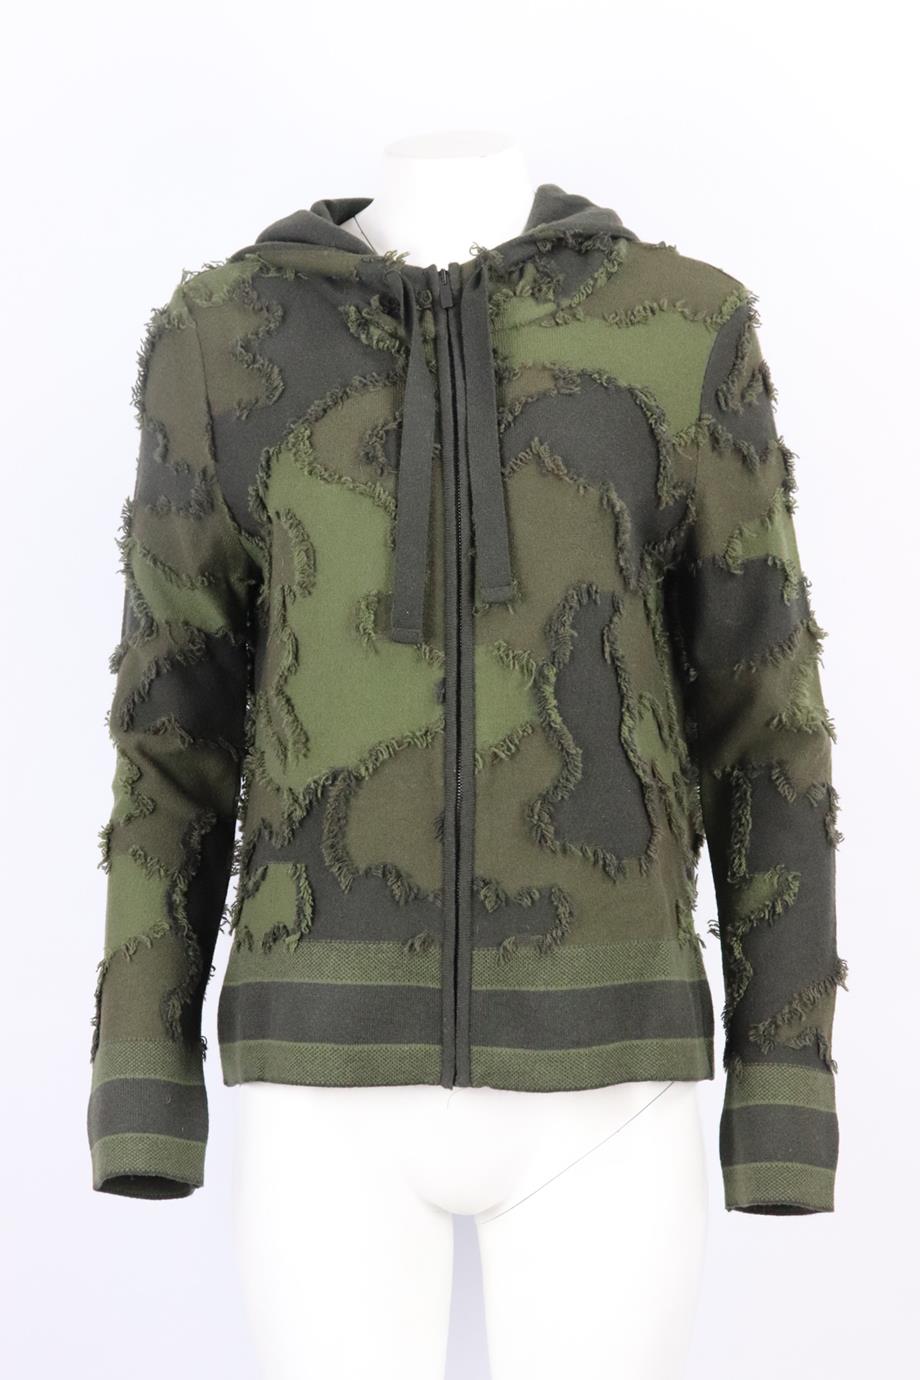 CHRISTIAN DIOR 2020 CAMOUFLAGE INTARSIA CASHMERE BLEND HOODIE FR 44 UK 16